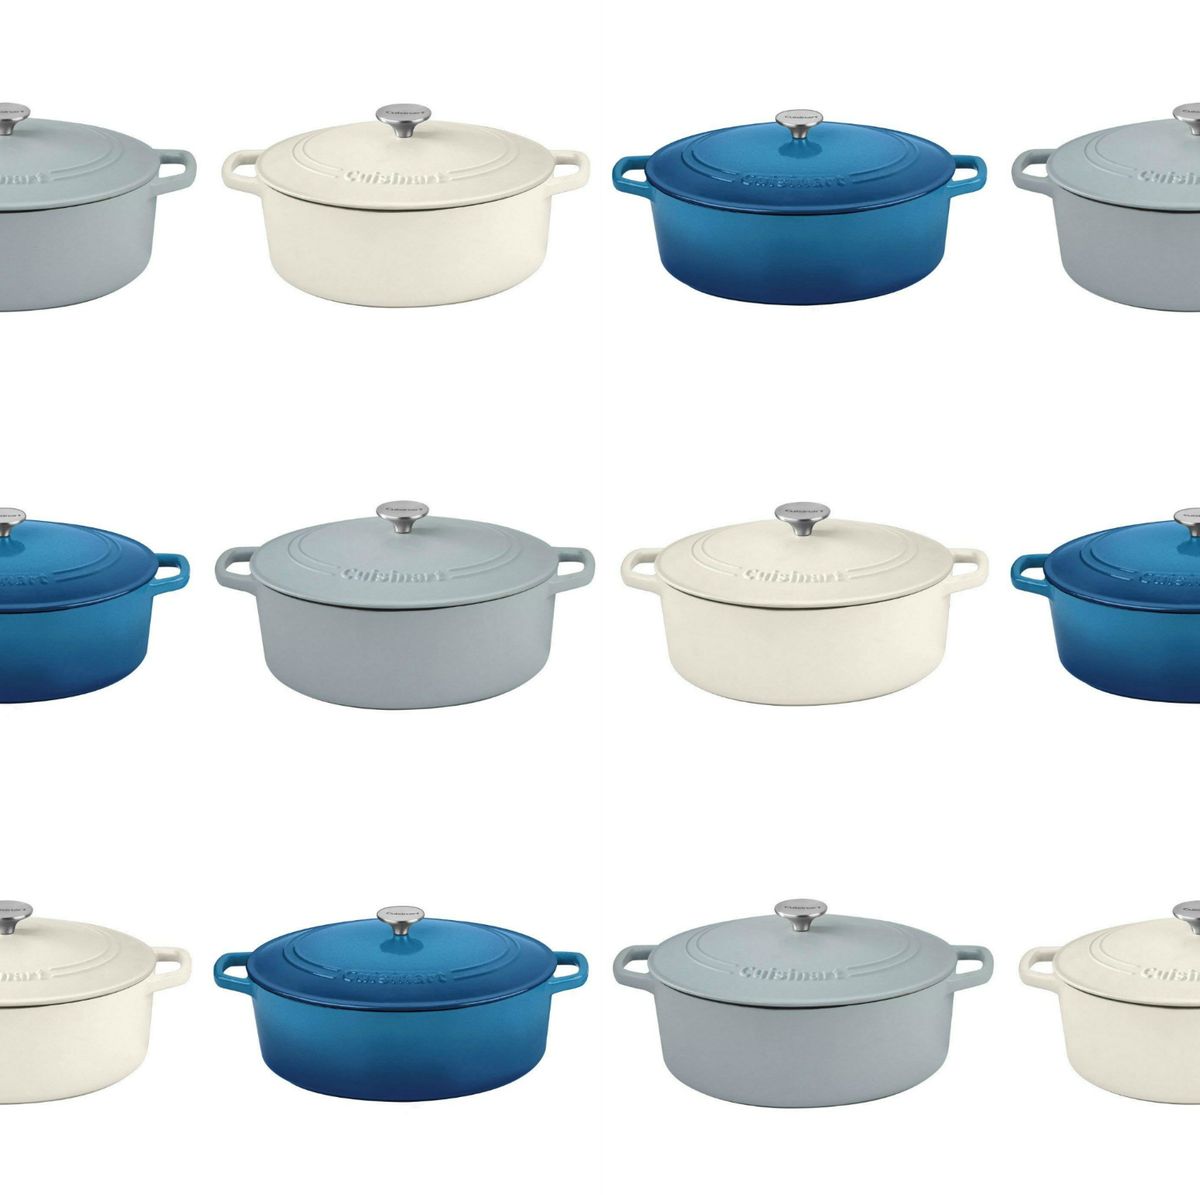 Is Having A Major Sale on Cuisinart Casserole Dishes Today